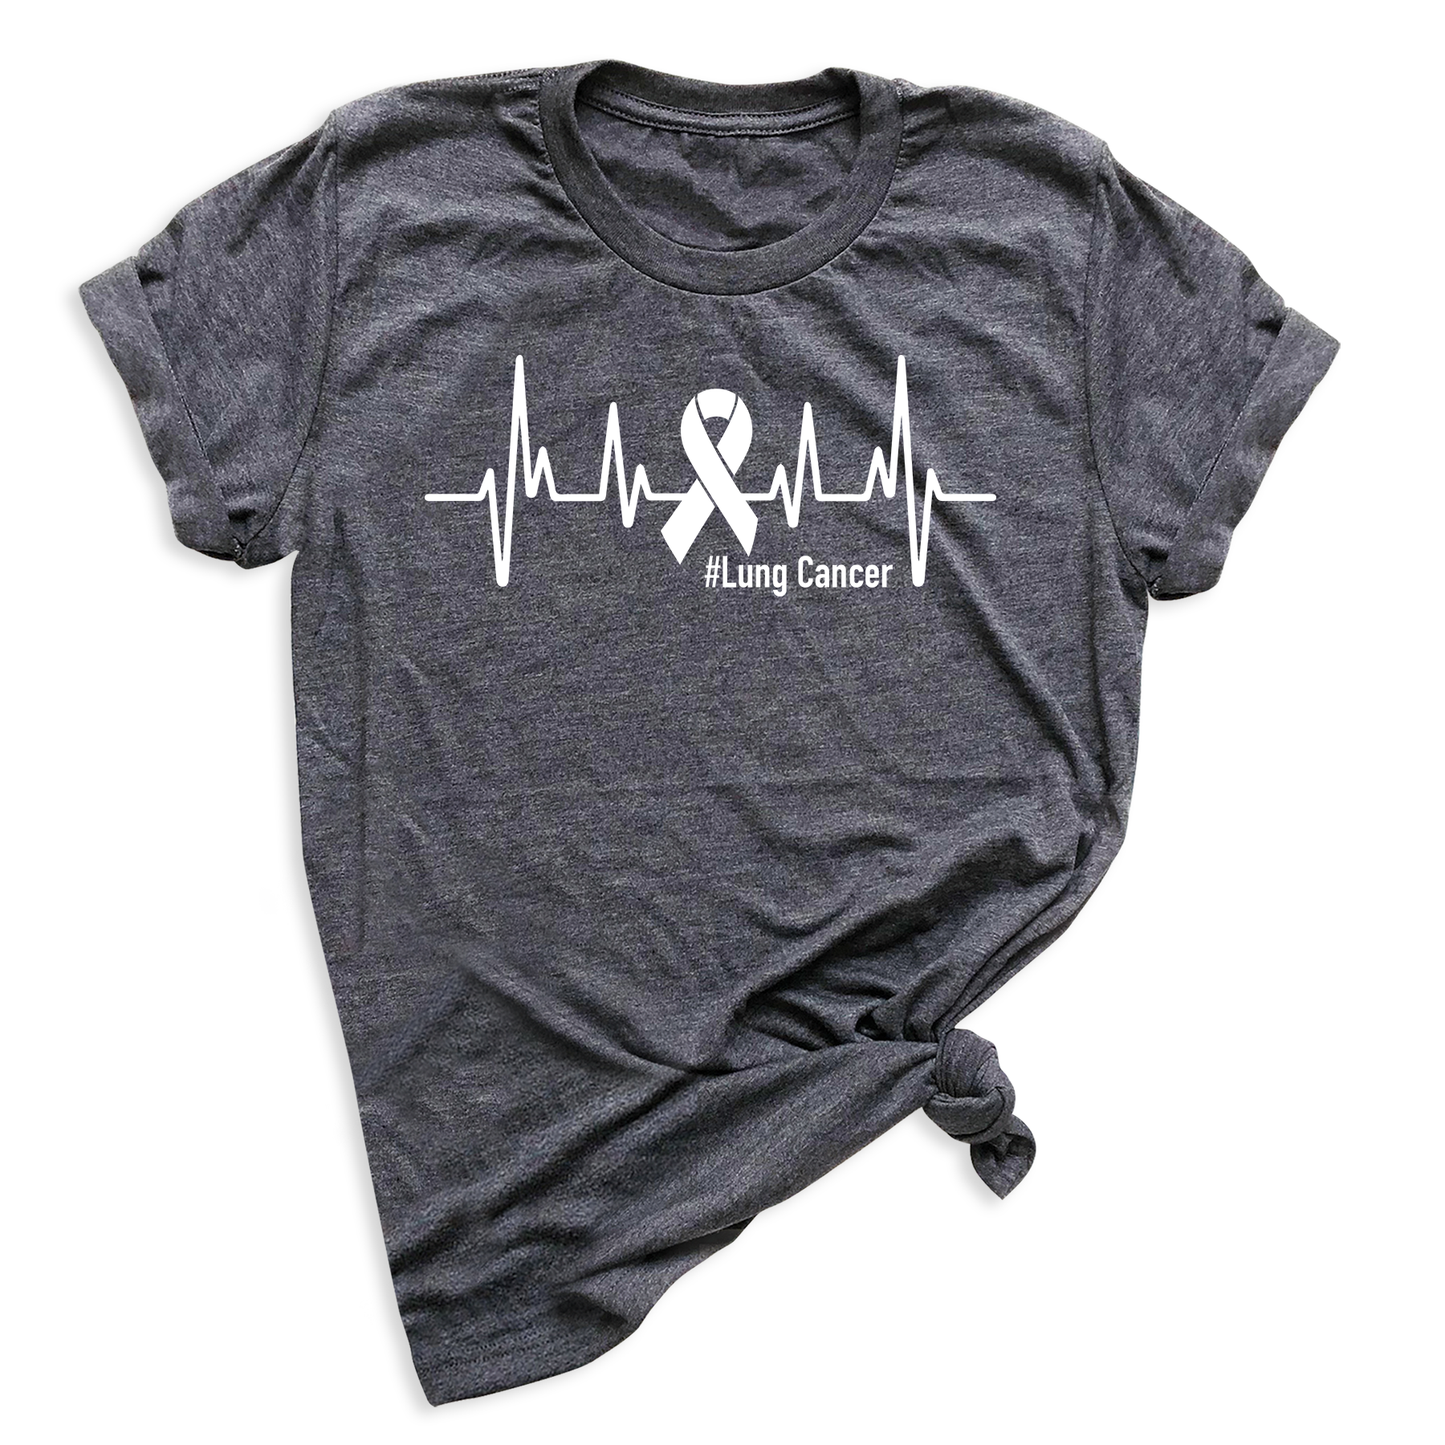 Lung Cancer Support Shirts